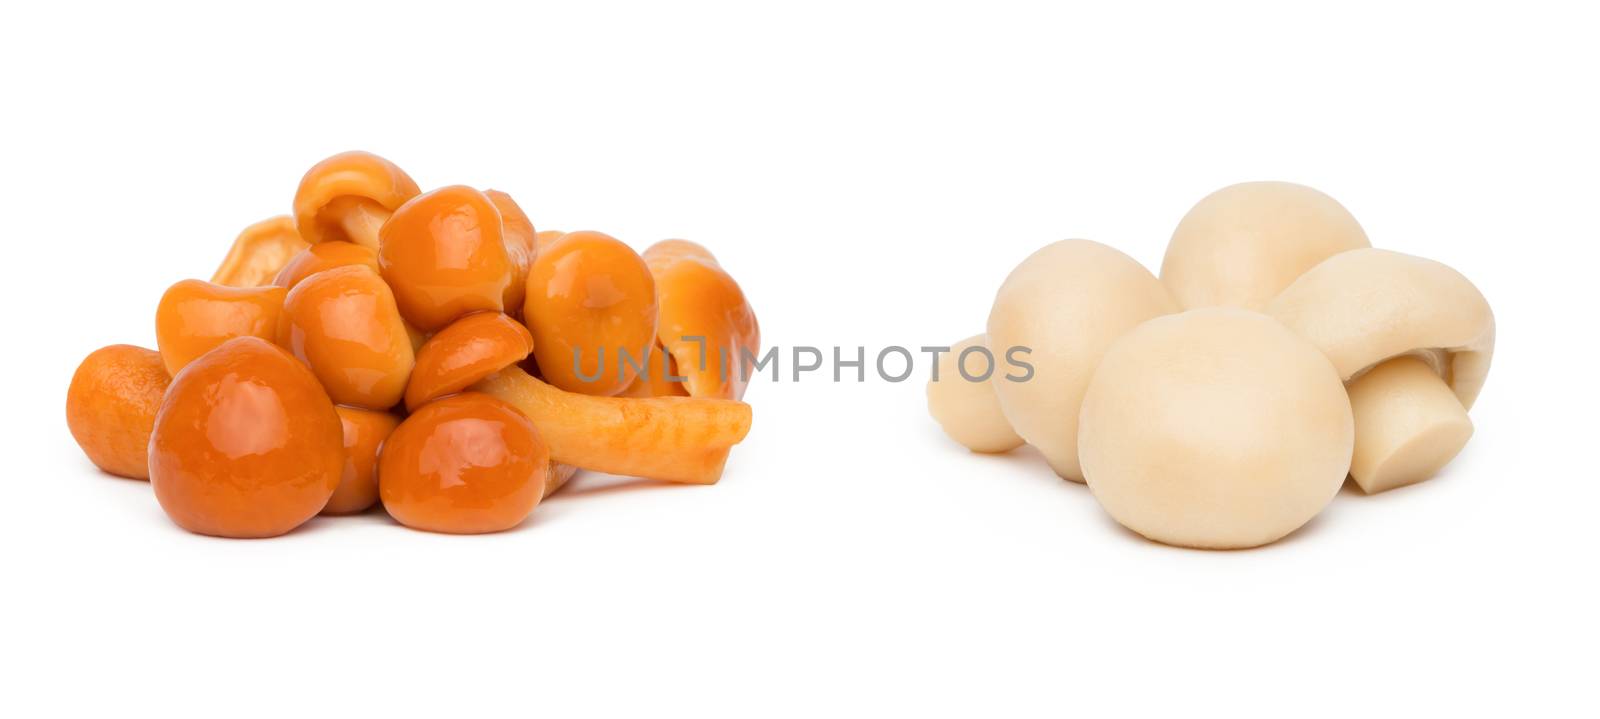 Marinated mushrooms isolated on white by ozaiachin